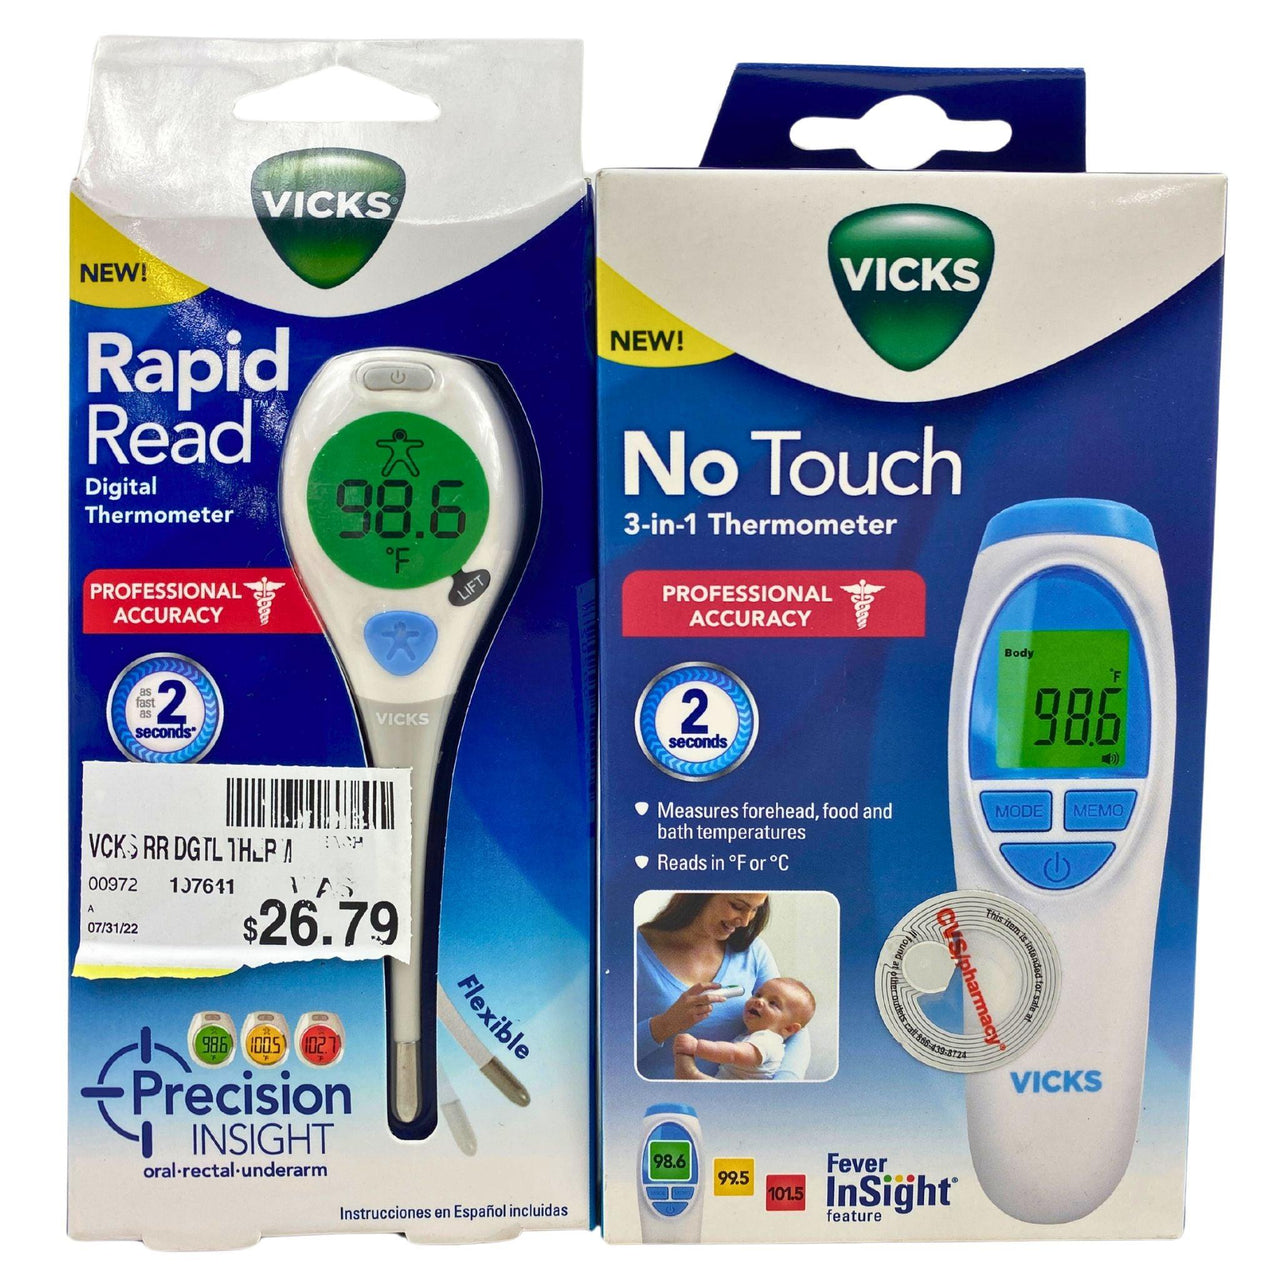 Vicks Thermometers Mix - No Touch 3-in-1 Thermometer & Rapid Read Digital Thermometer (55 Pcs Lot) - Discount Wholesalers Inc